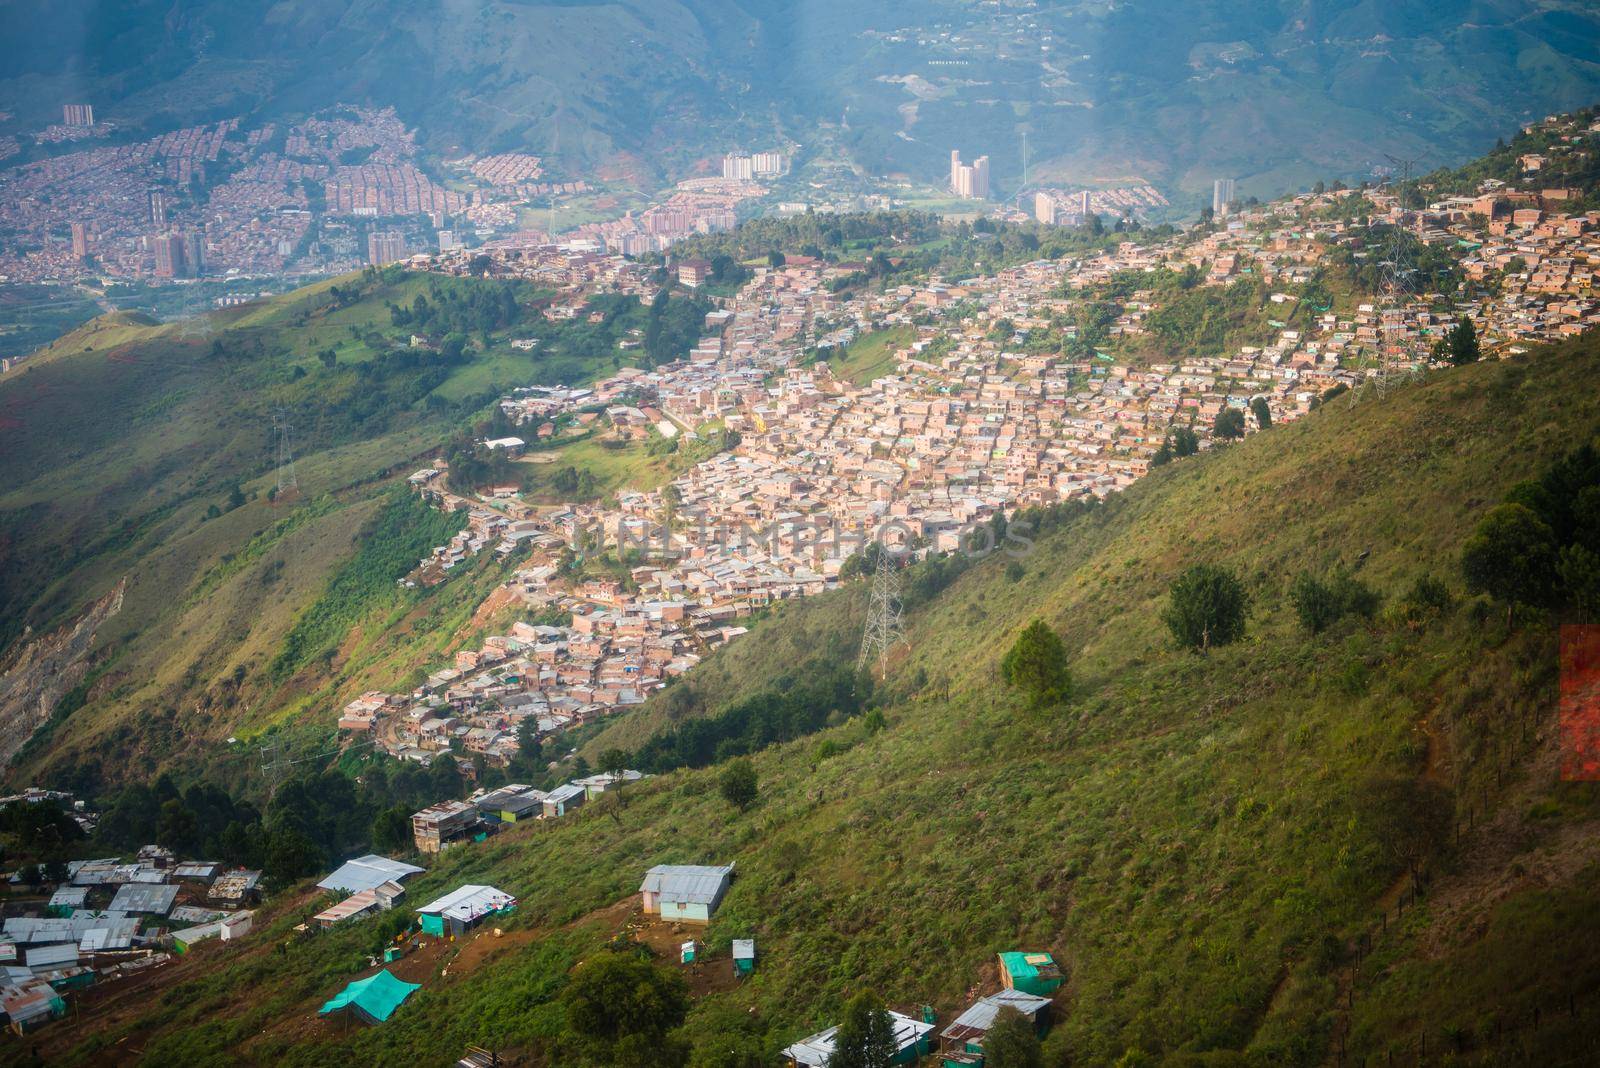 Aerial view of many houses in Medellin, Colombia.